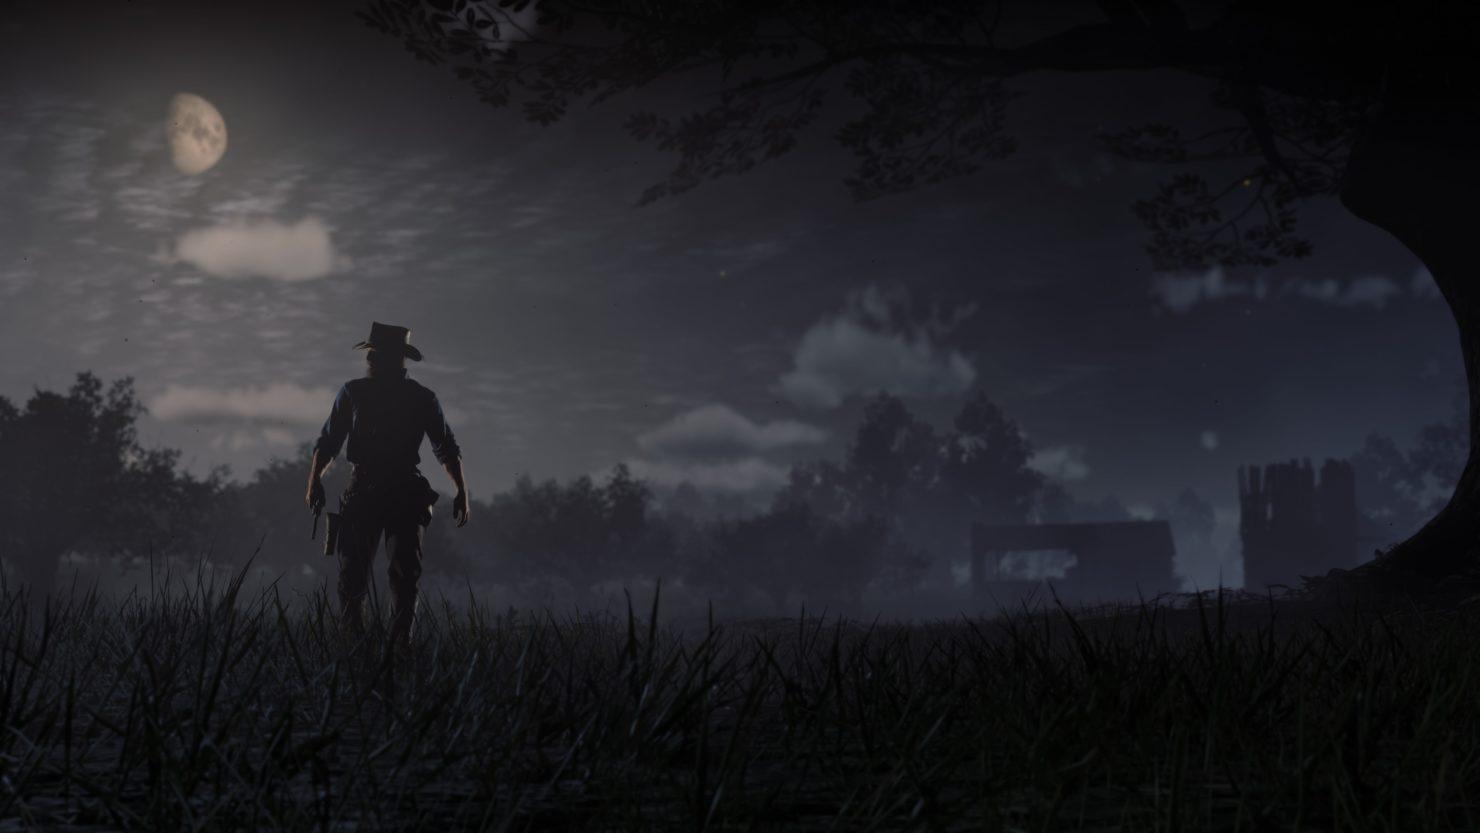 Red Dead Redemption 2 PC technical review - Fastest draw distance